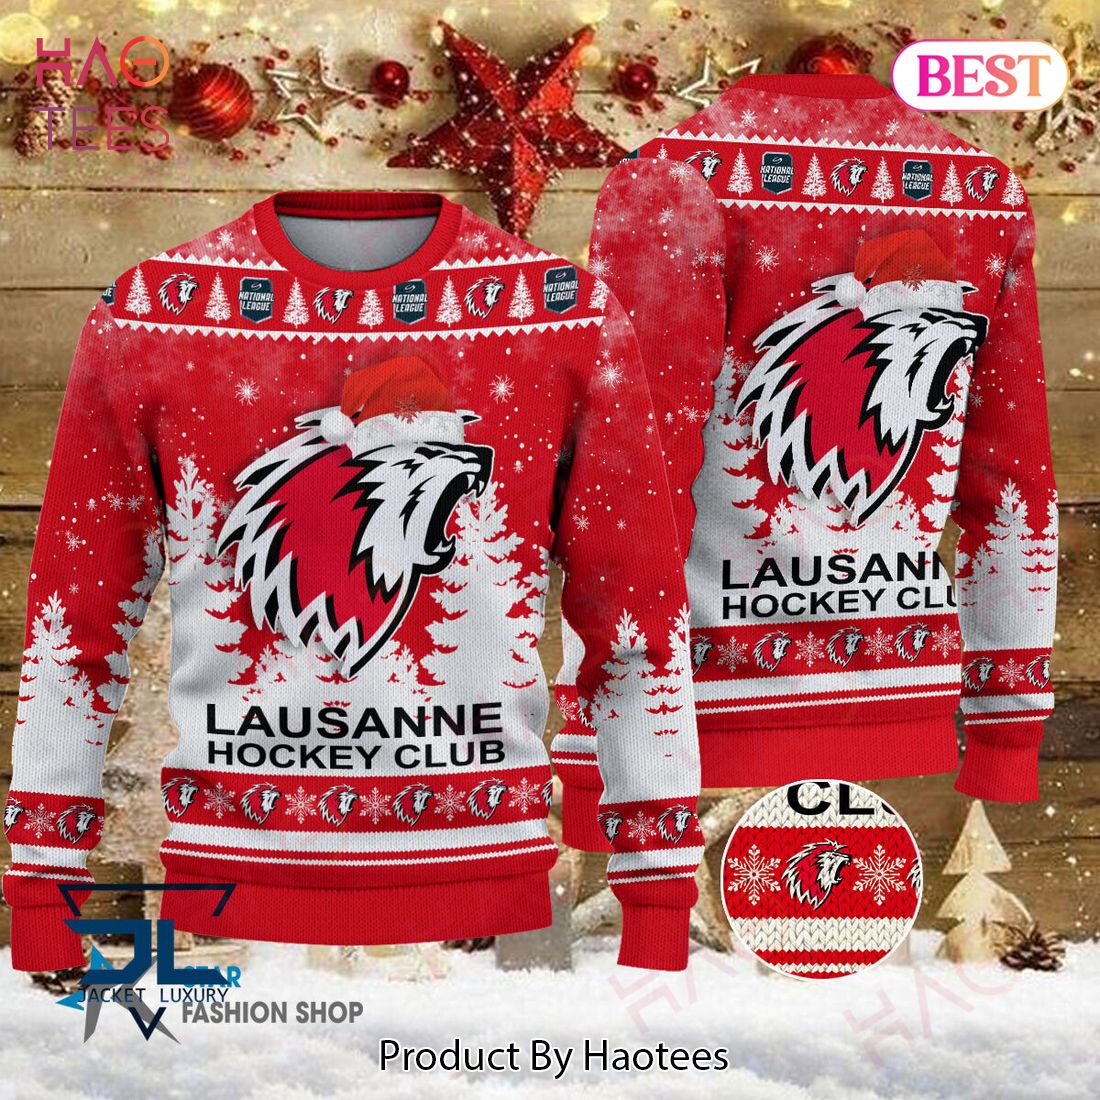 NEW Lausanne Hockey Club Red Mix White Luxury Brand Sweater Limited Edition